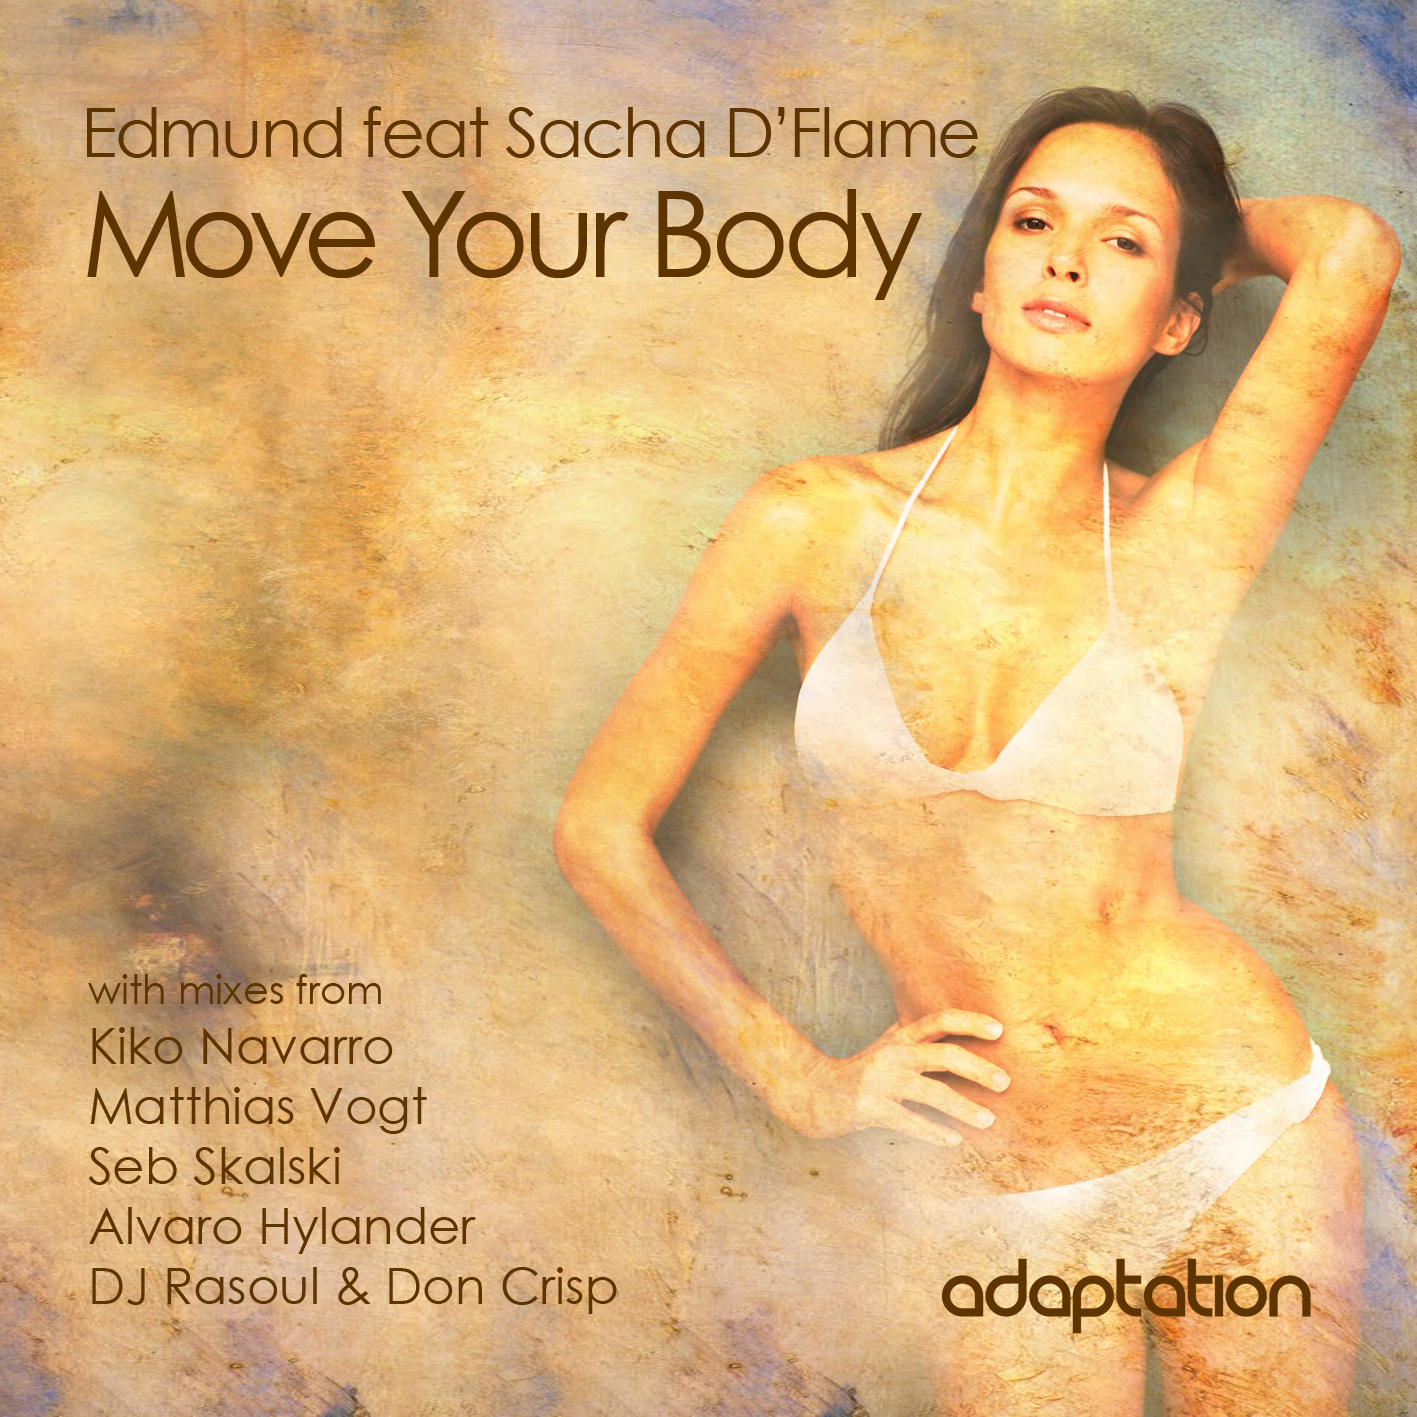 Edmund feat. Sacha Dflame - Move Your Body